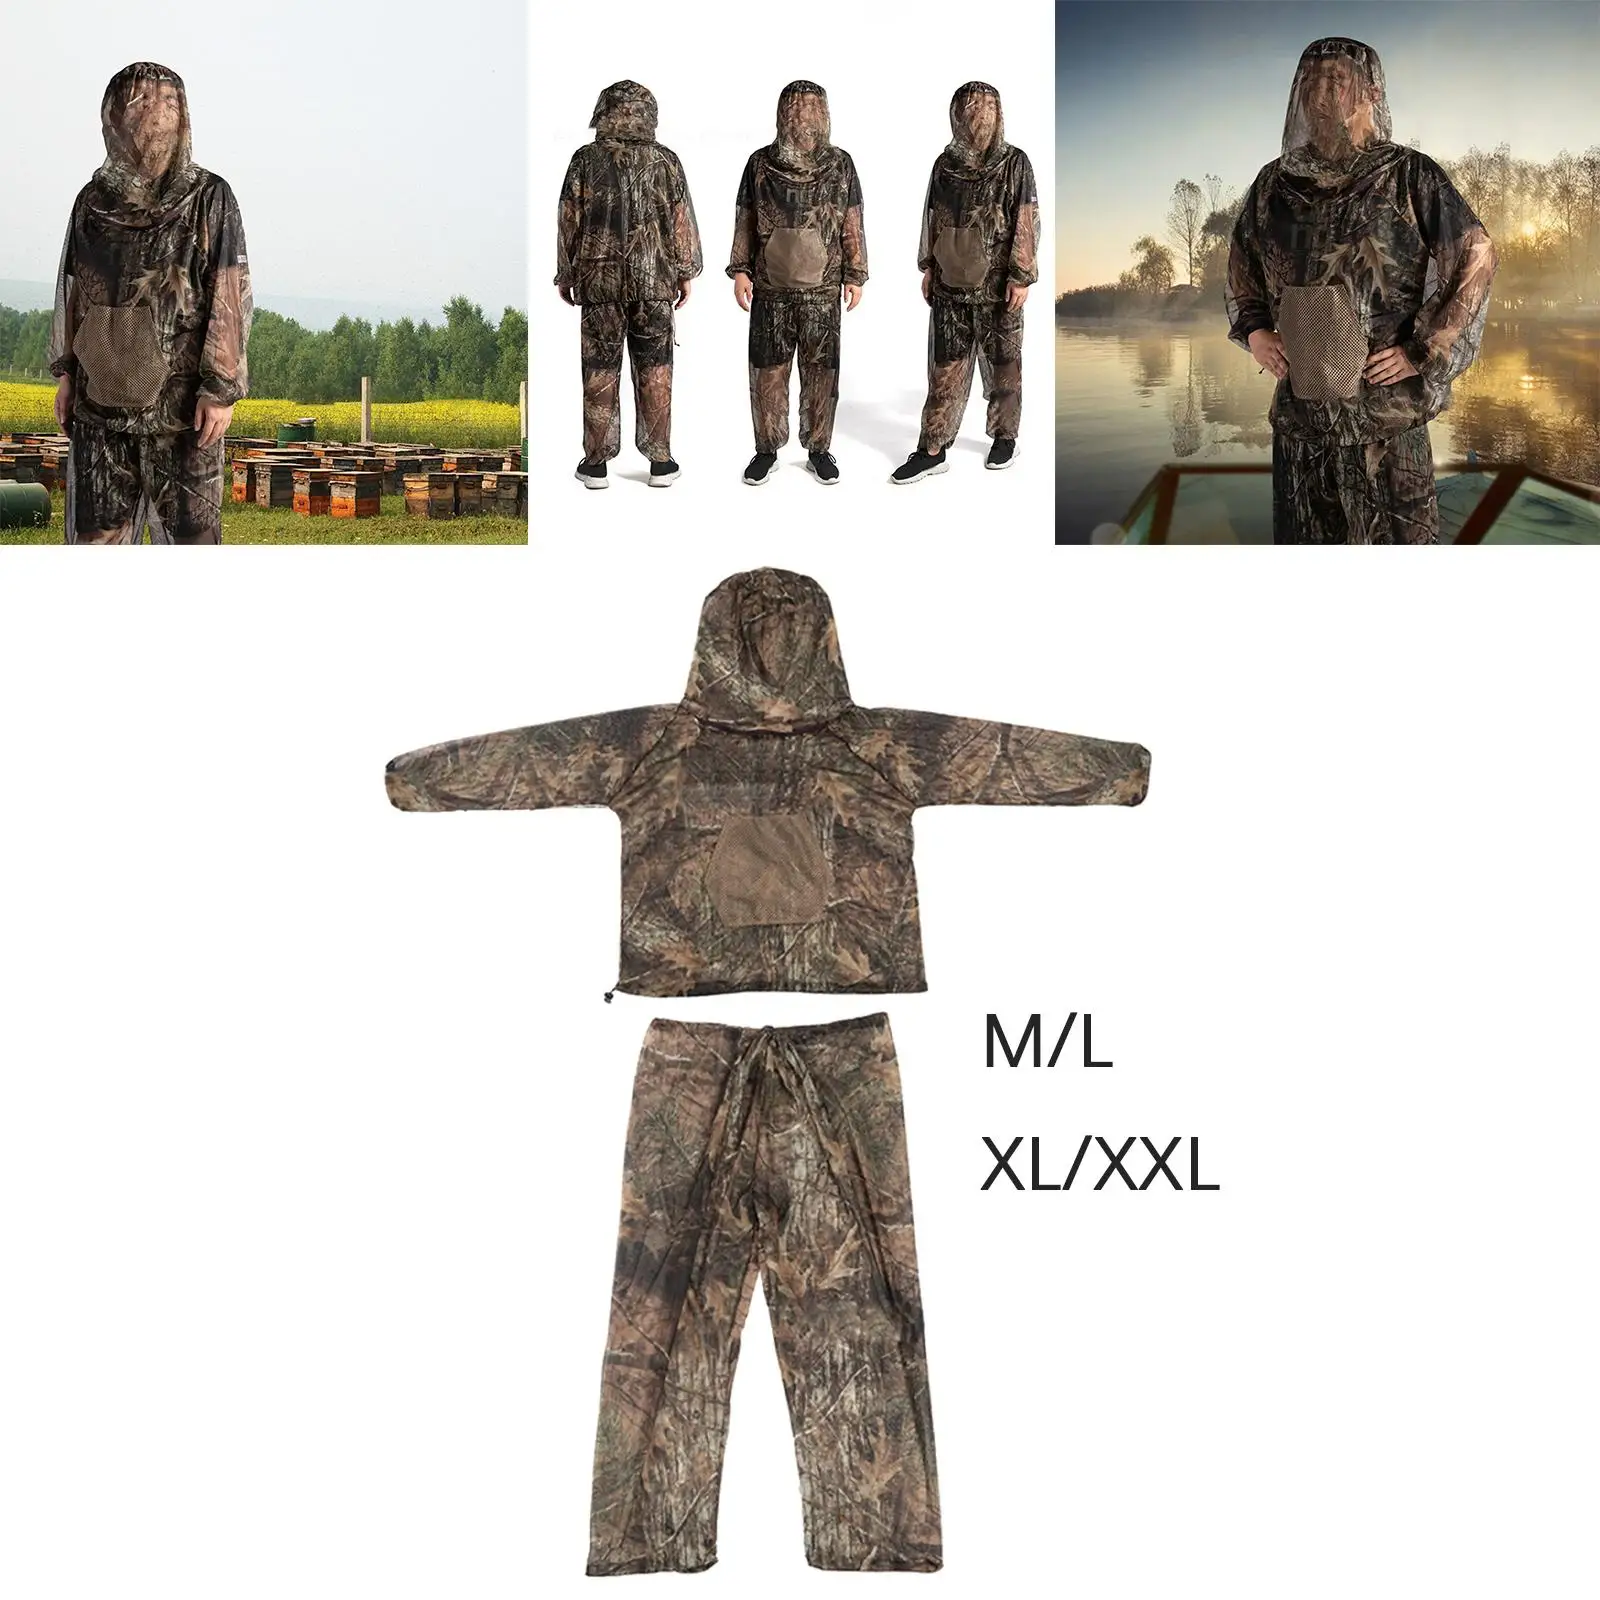 Mesh Hooded suits protection Summer Breathable for Camping Hunting